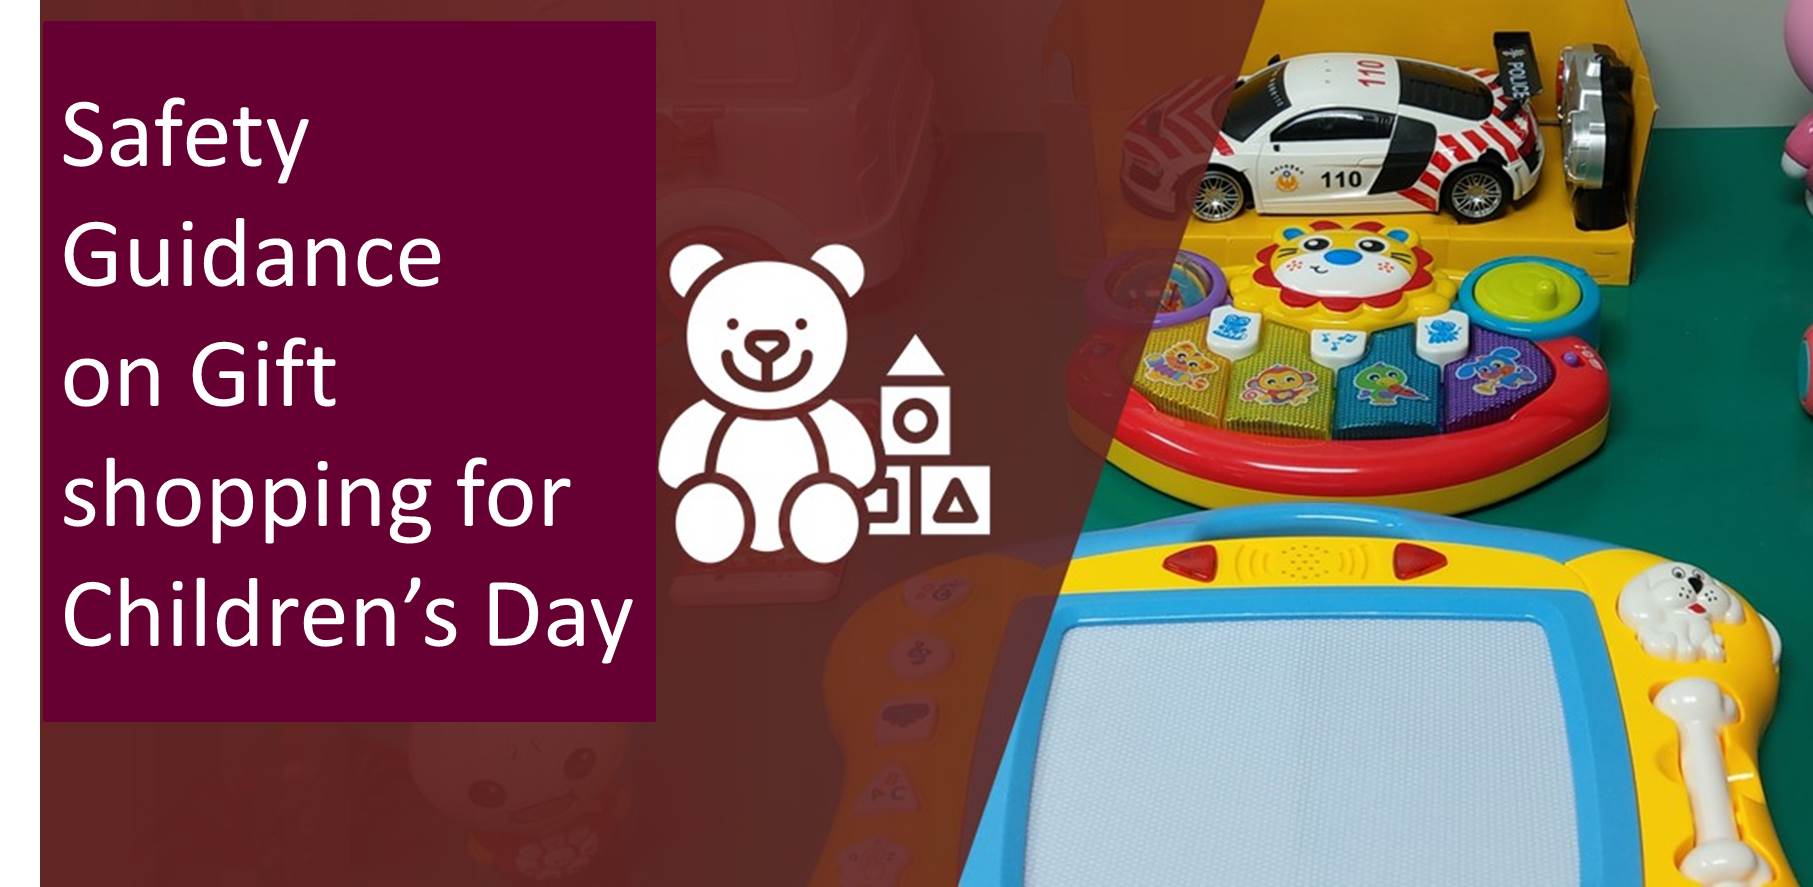 Safety Guidance on Gift Shopping for Children's Day